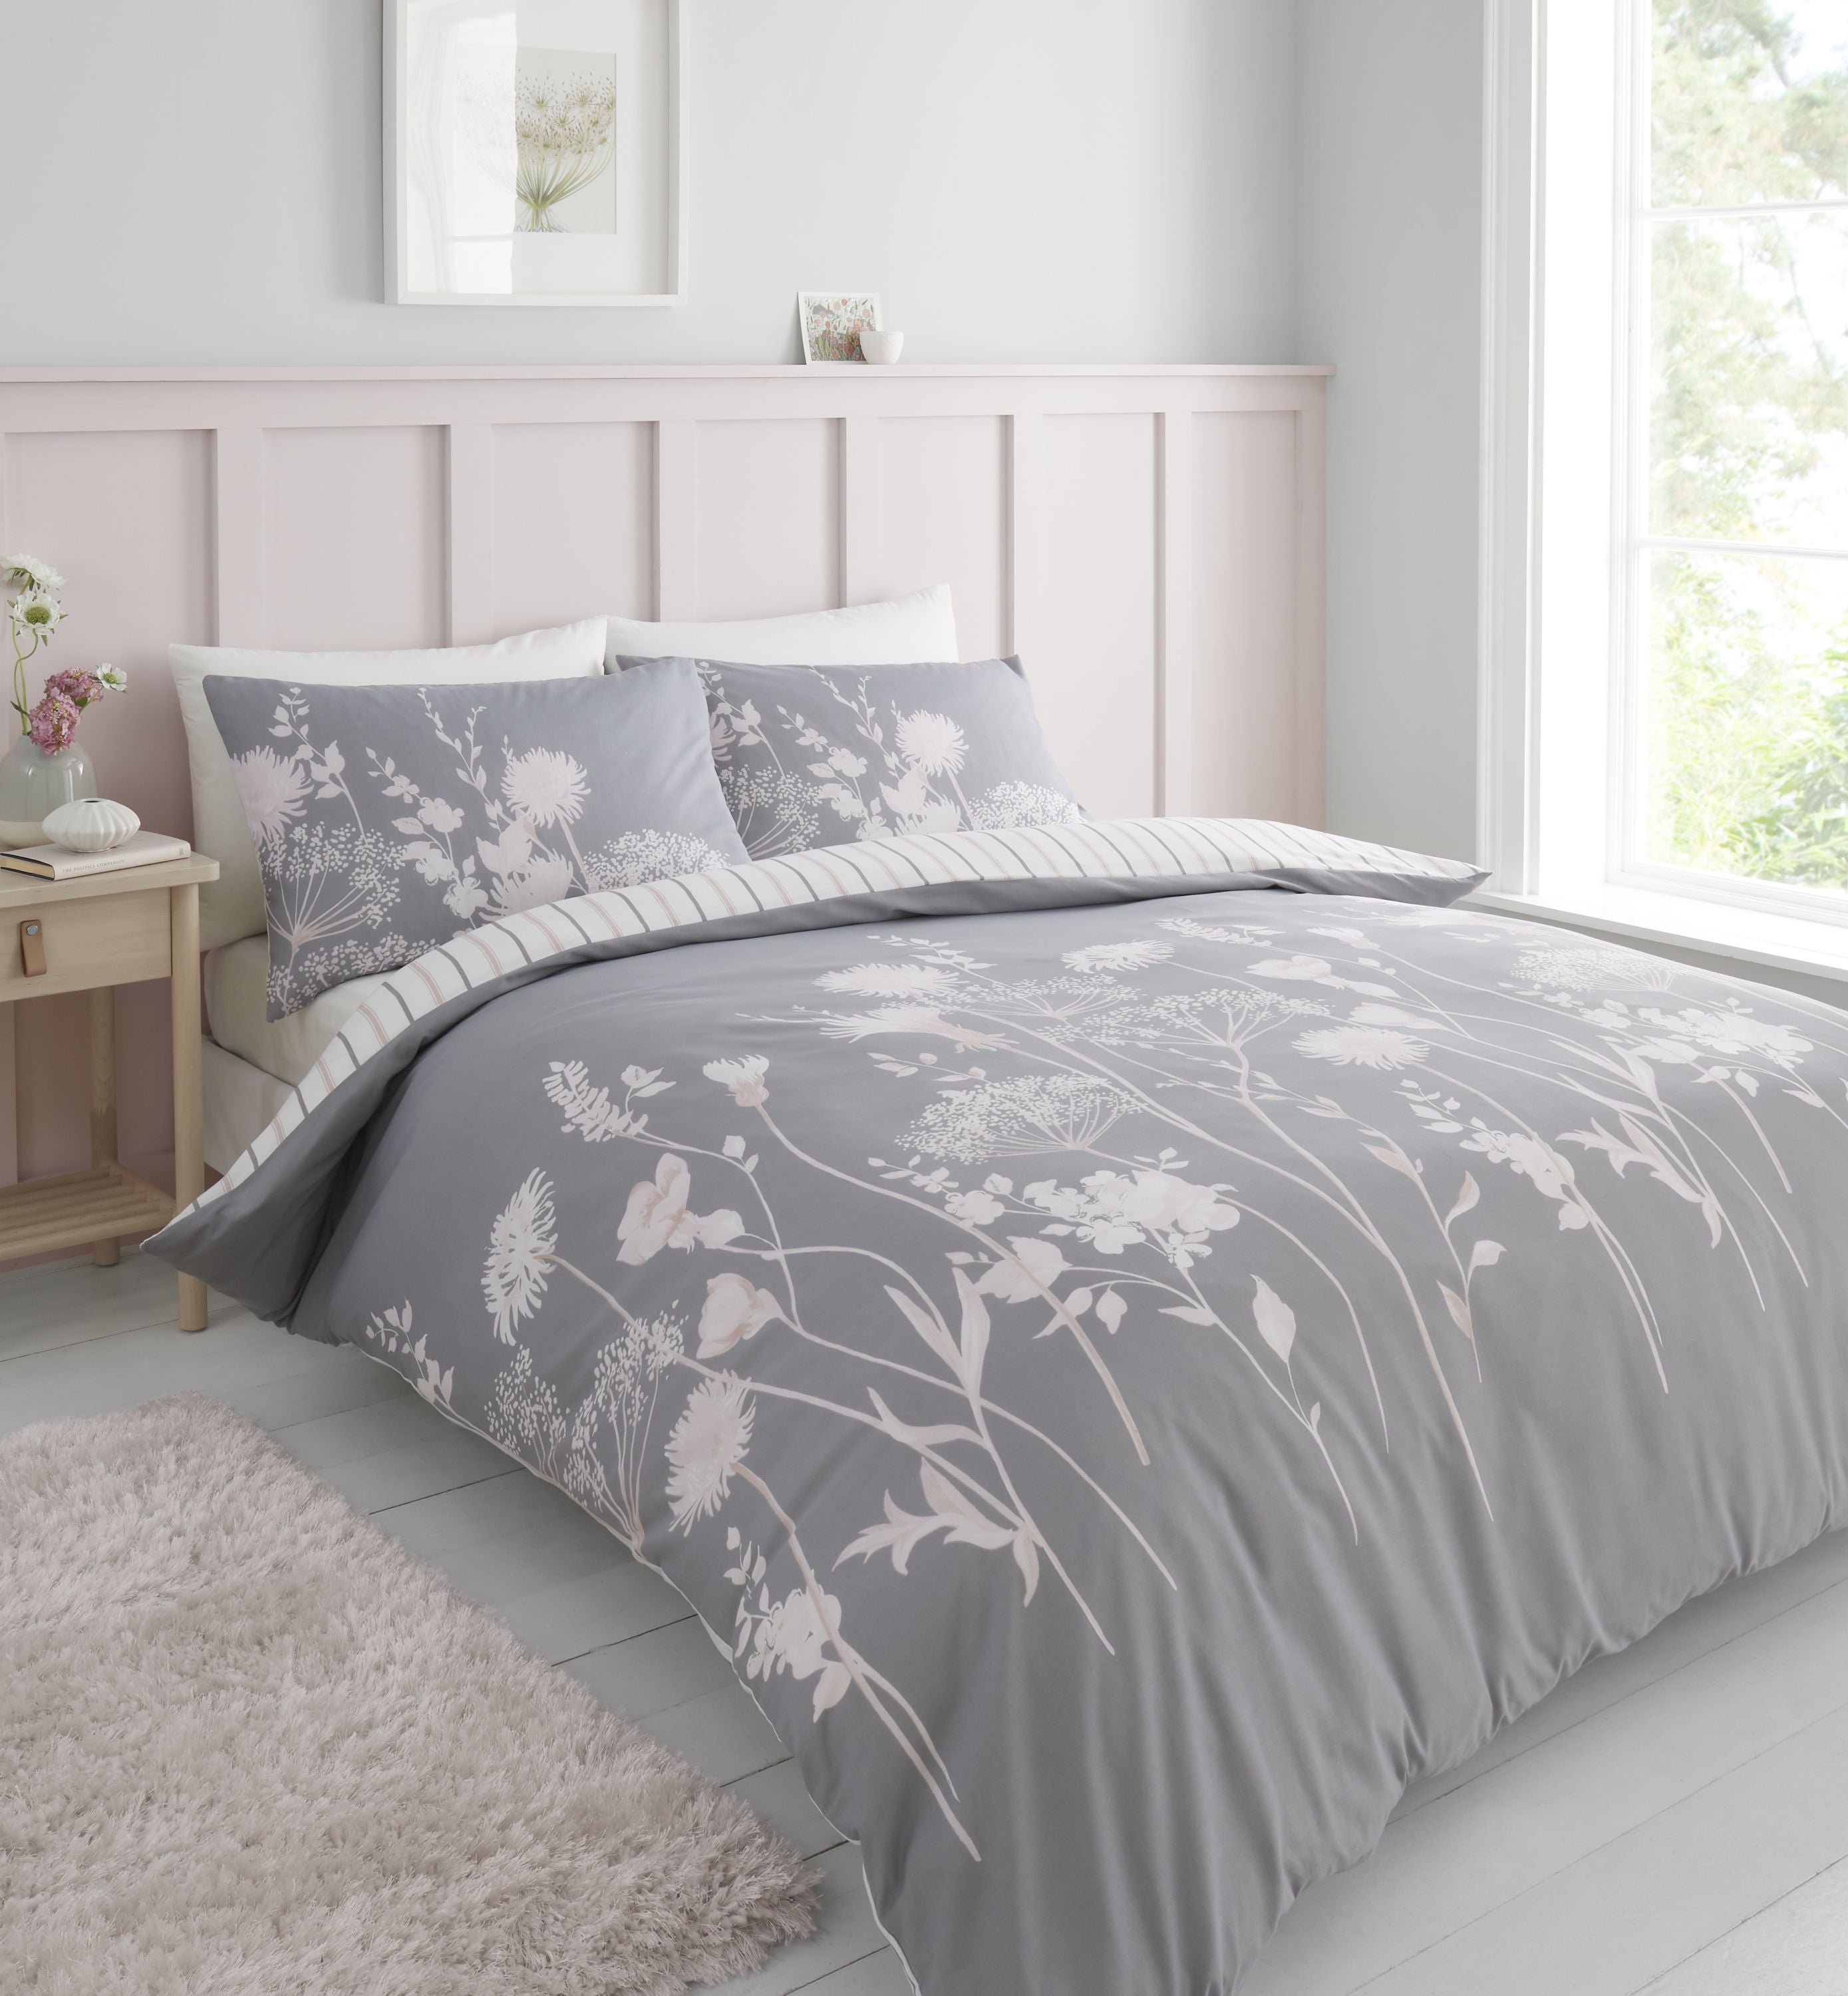 Catherine Lansfield Meadowsweet Floral Pink Duvet Cover And Pillowcase Set Pinkgrey